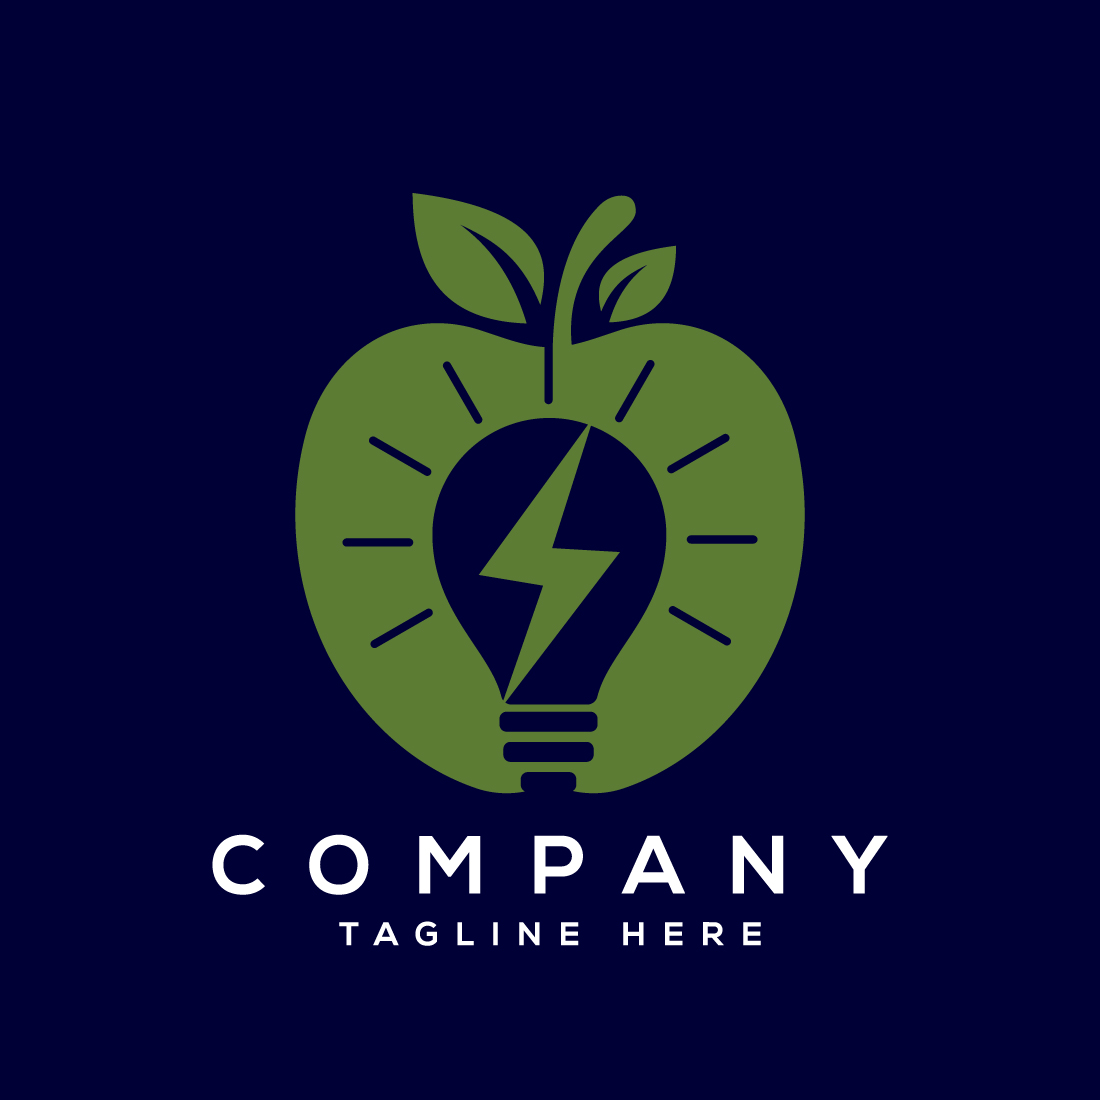 Apple and electricity logo sign symbol in flat style cover image.